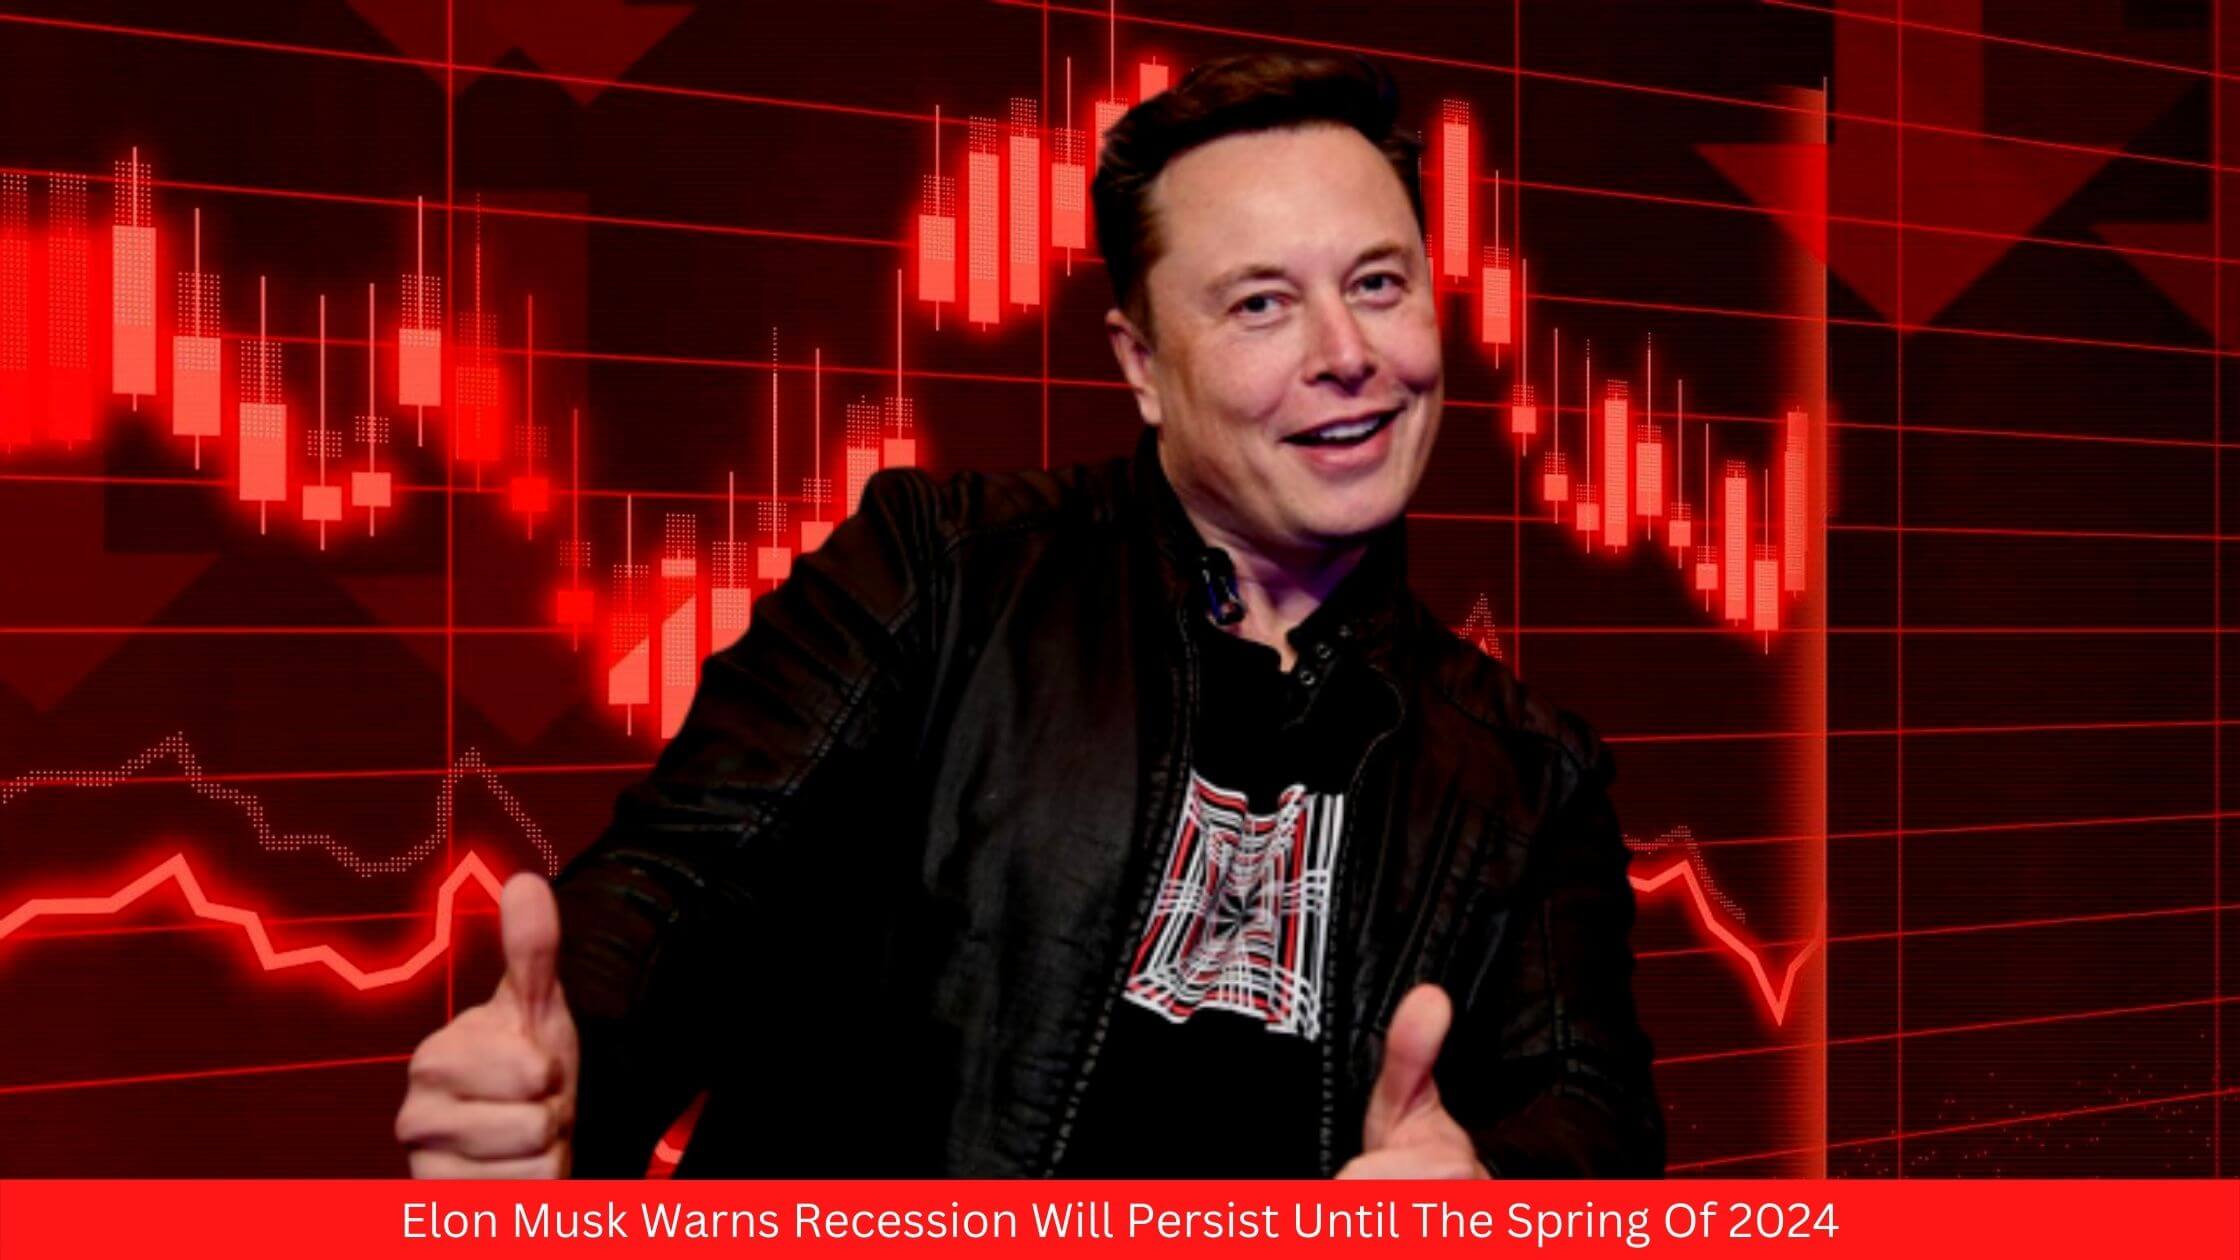 Elon Musk Warns Recession Will Persist Until The Spring Of 2024